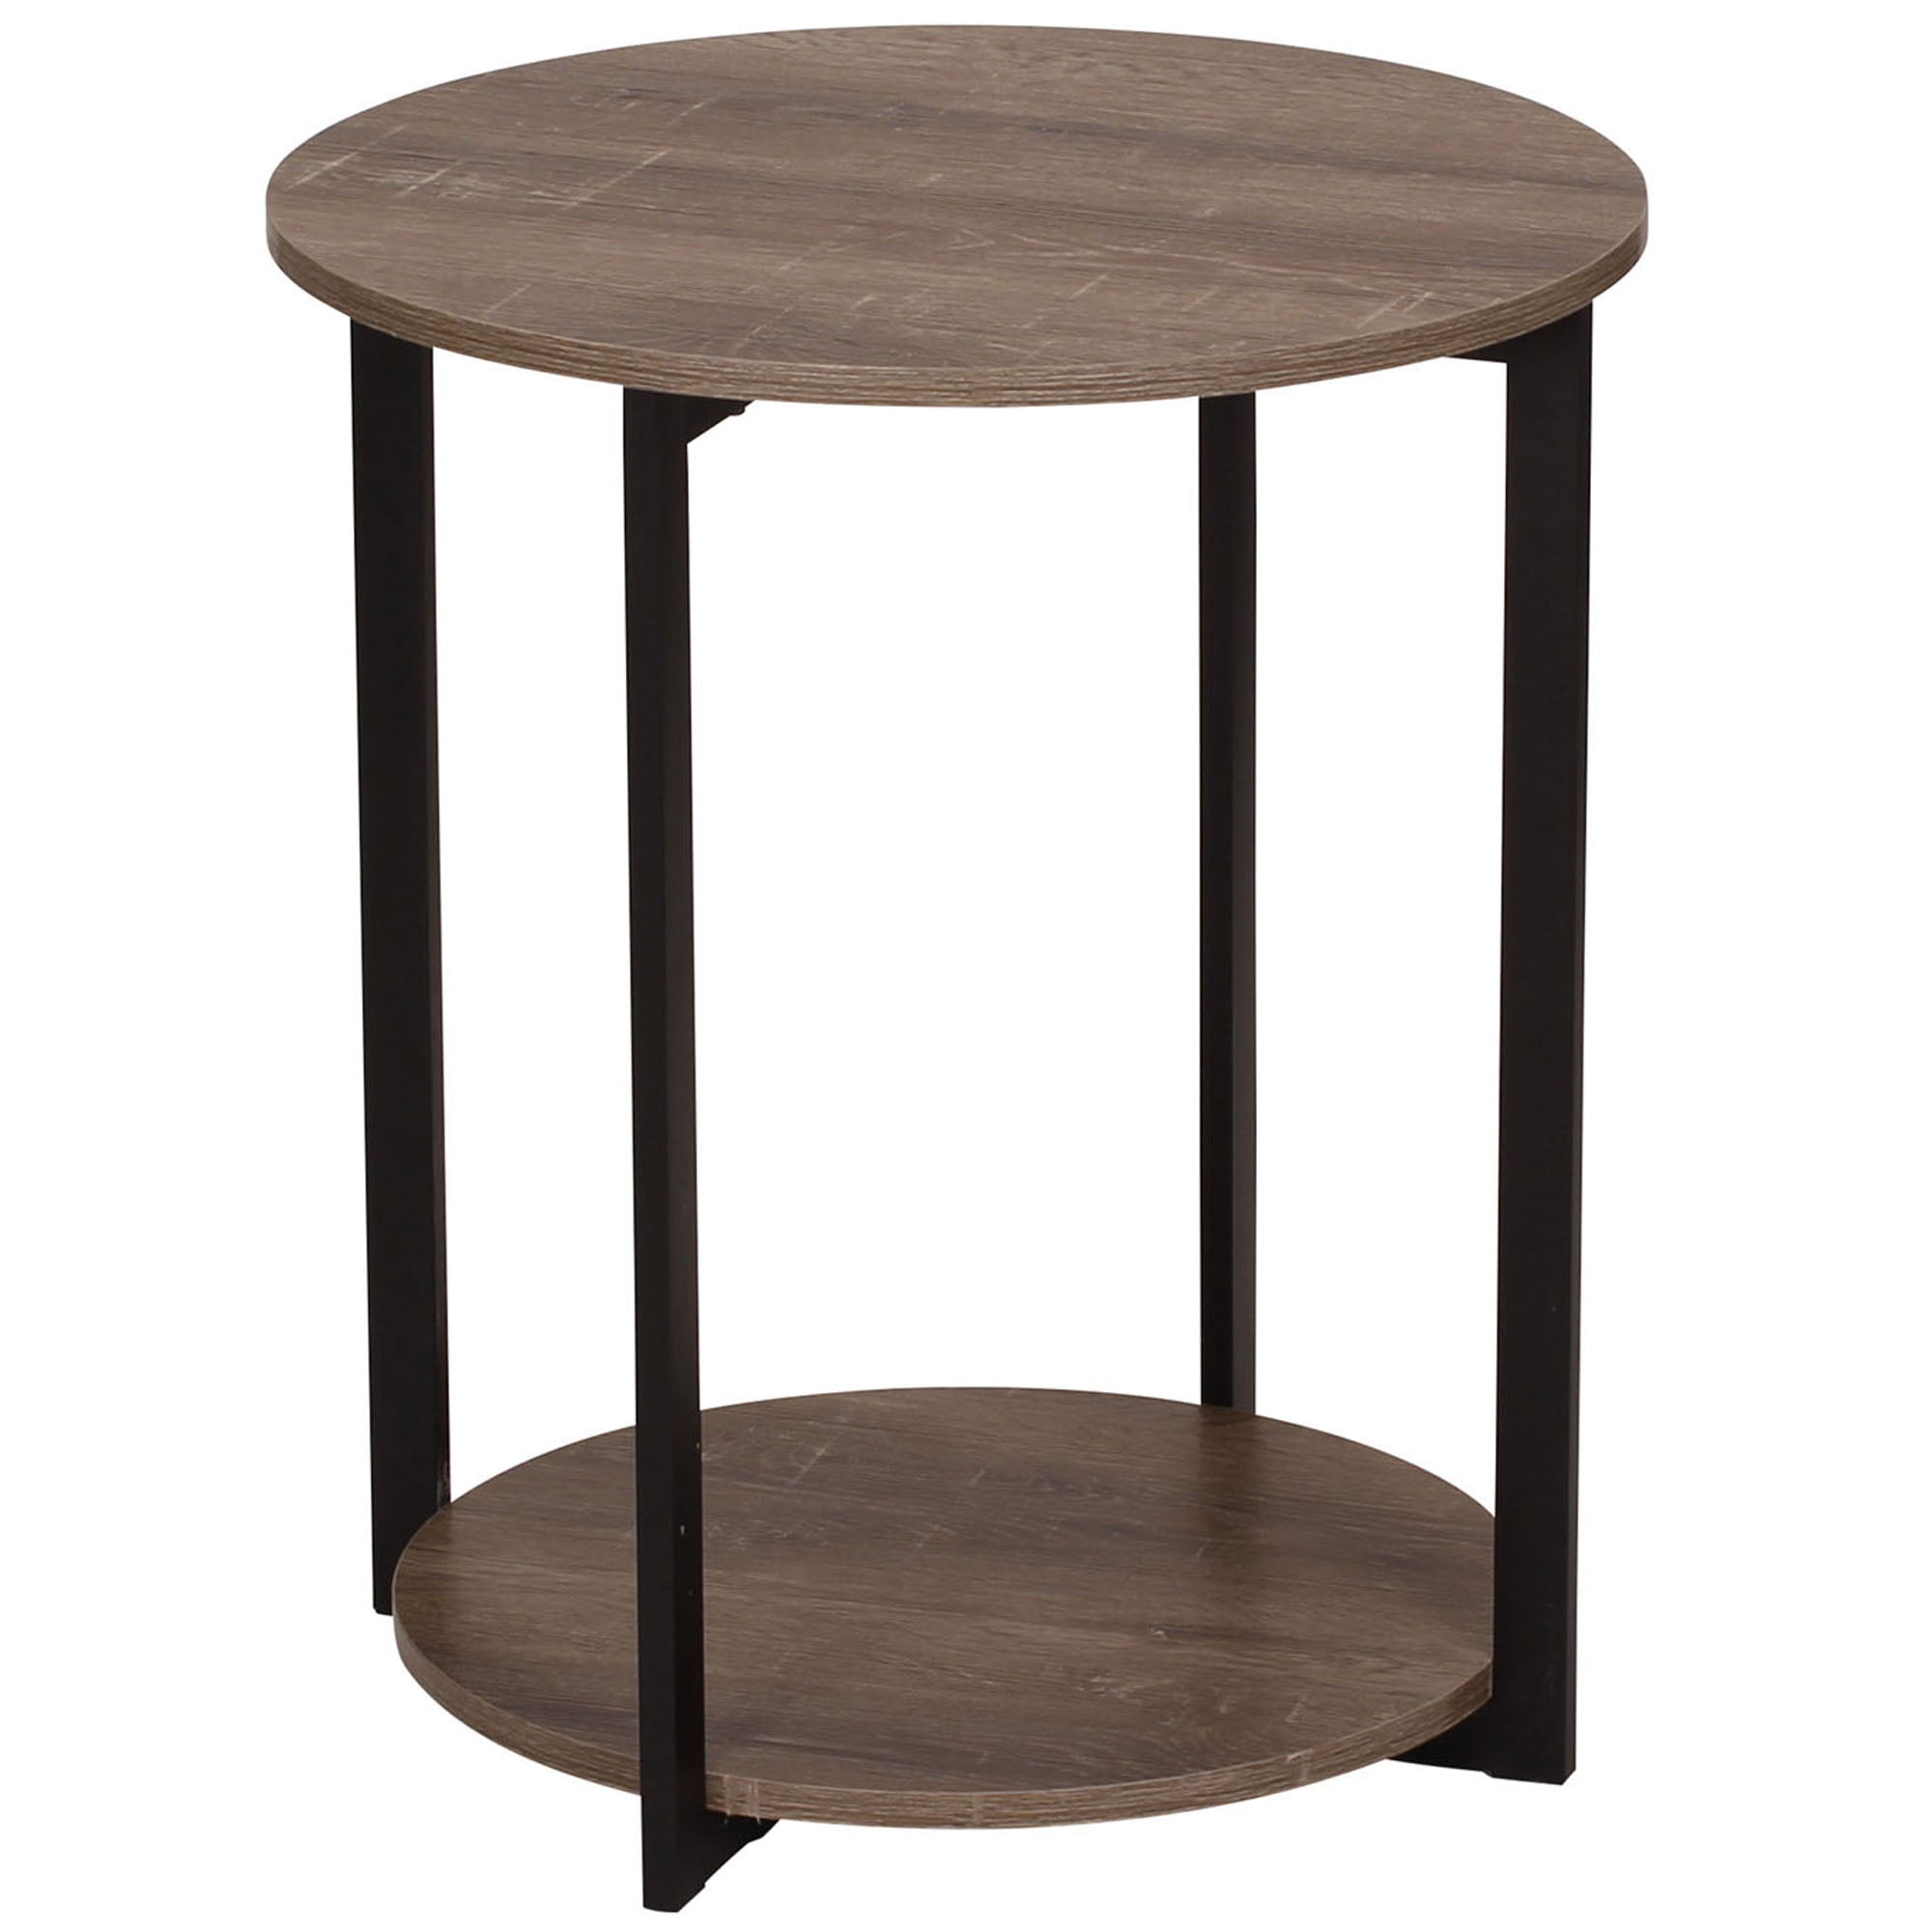 Round Side Table With Storage Shelf, Round Side Table With Drawer And Shelf